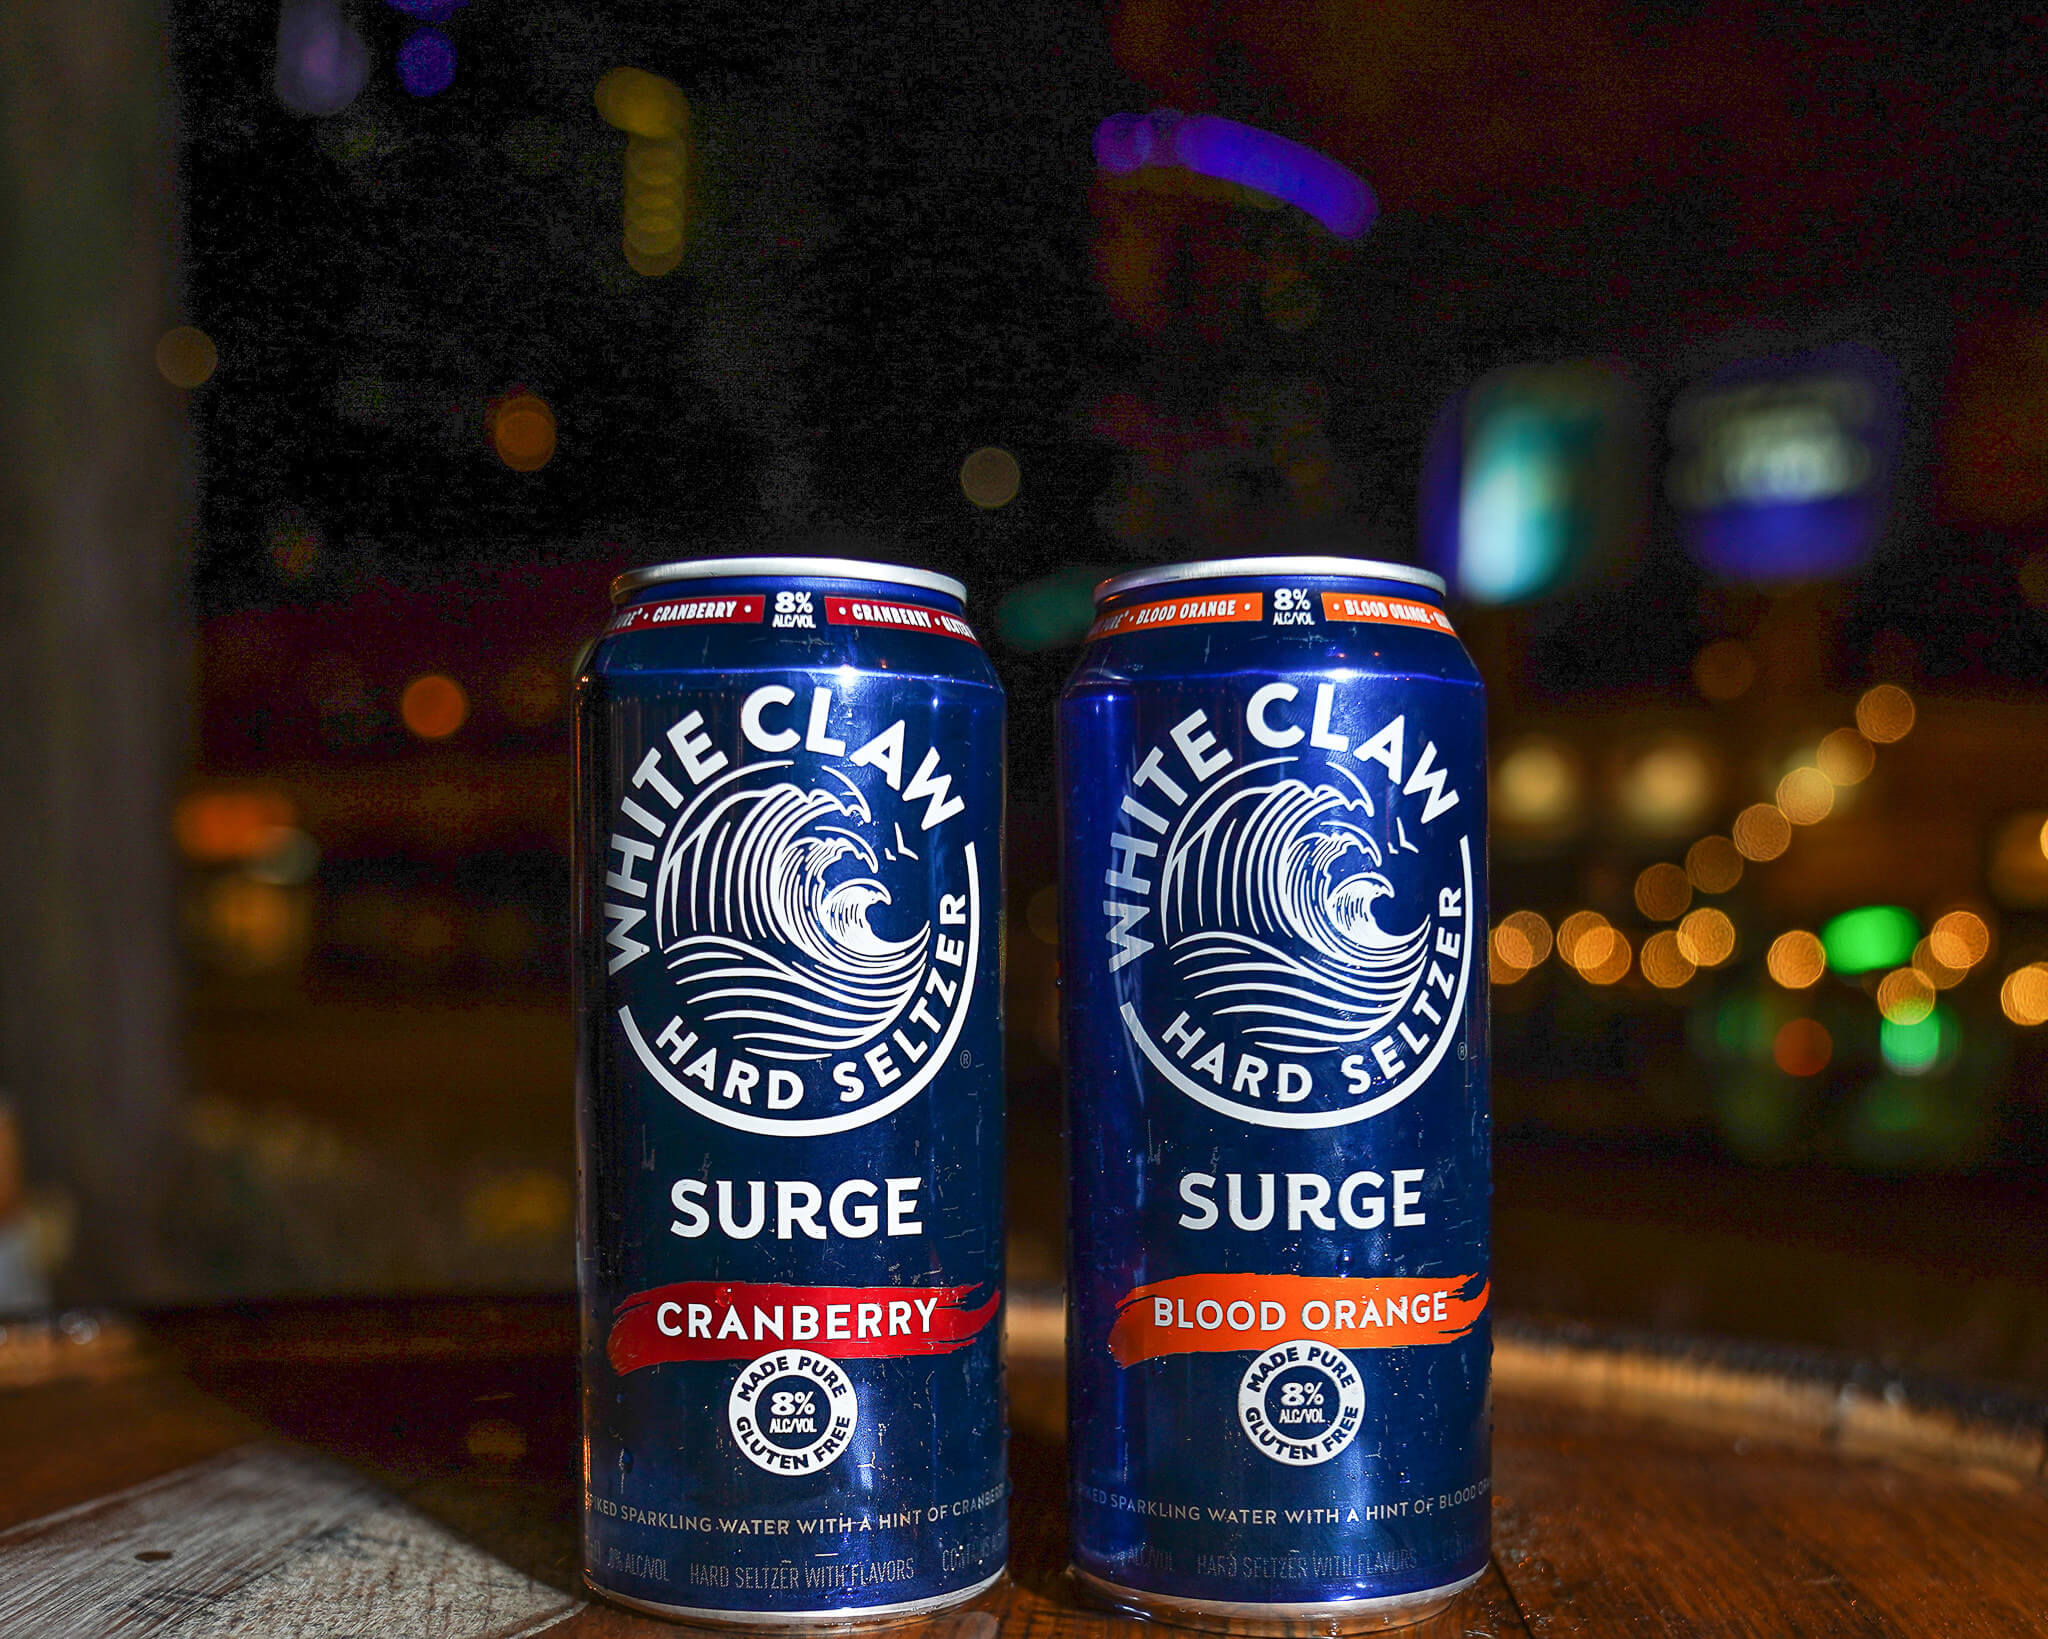 White Claw Surge Blood Orange and White Claw Surge Cranberry hard seltzer cans